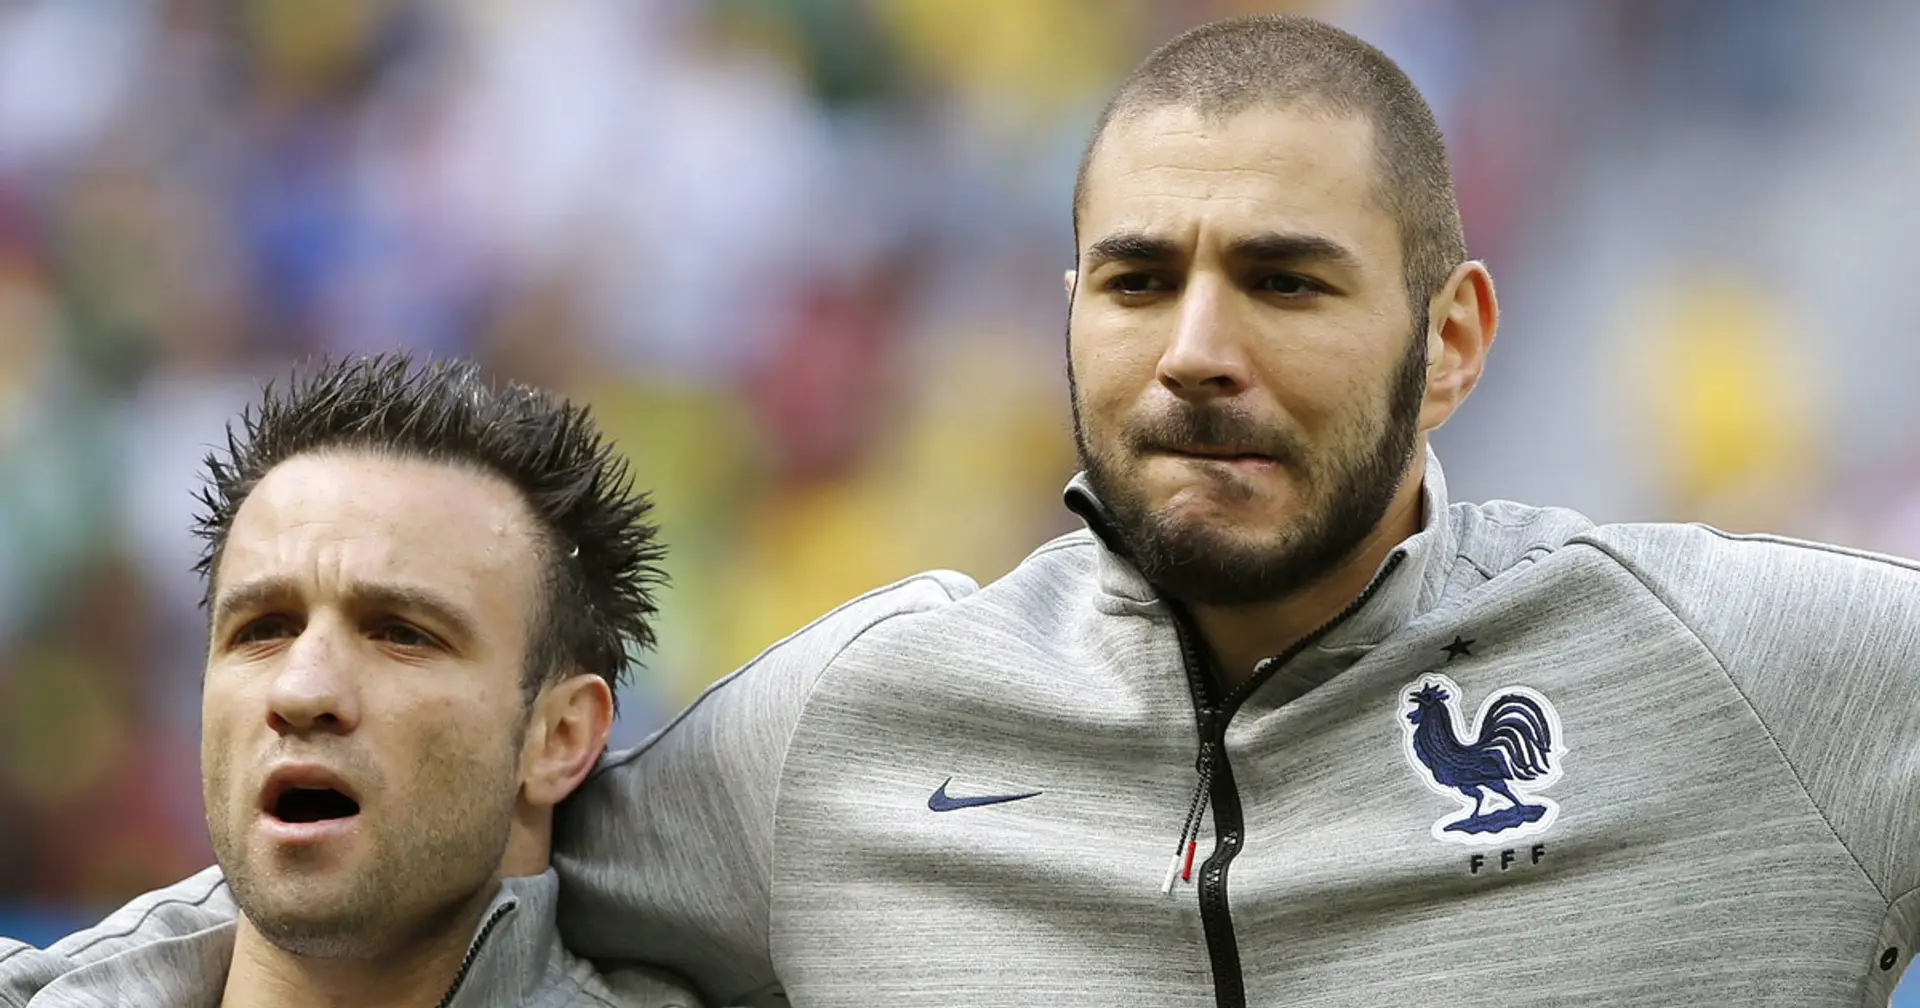 Confirmed: Karim Benzema will stand trial for his alleged involvement in Mathieu Valbuena blackmail scandal